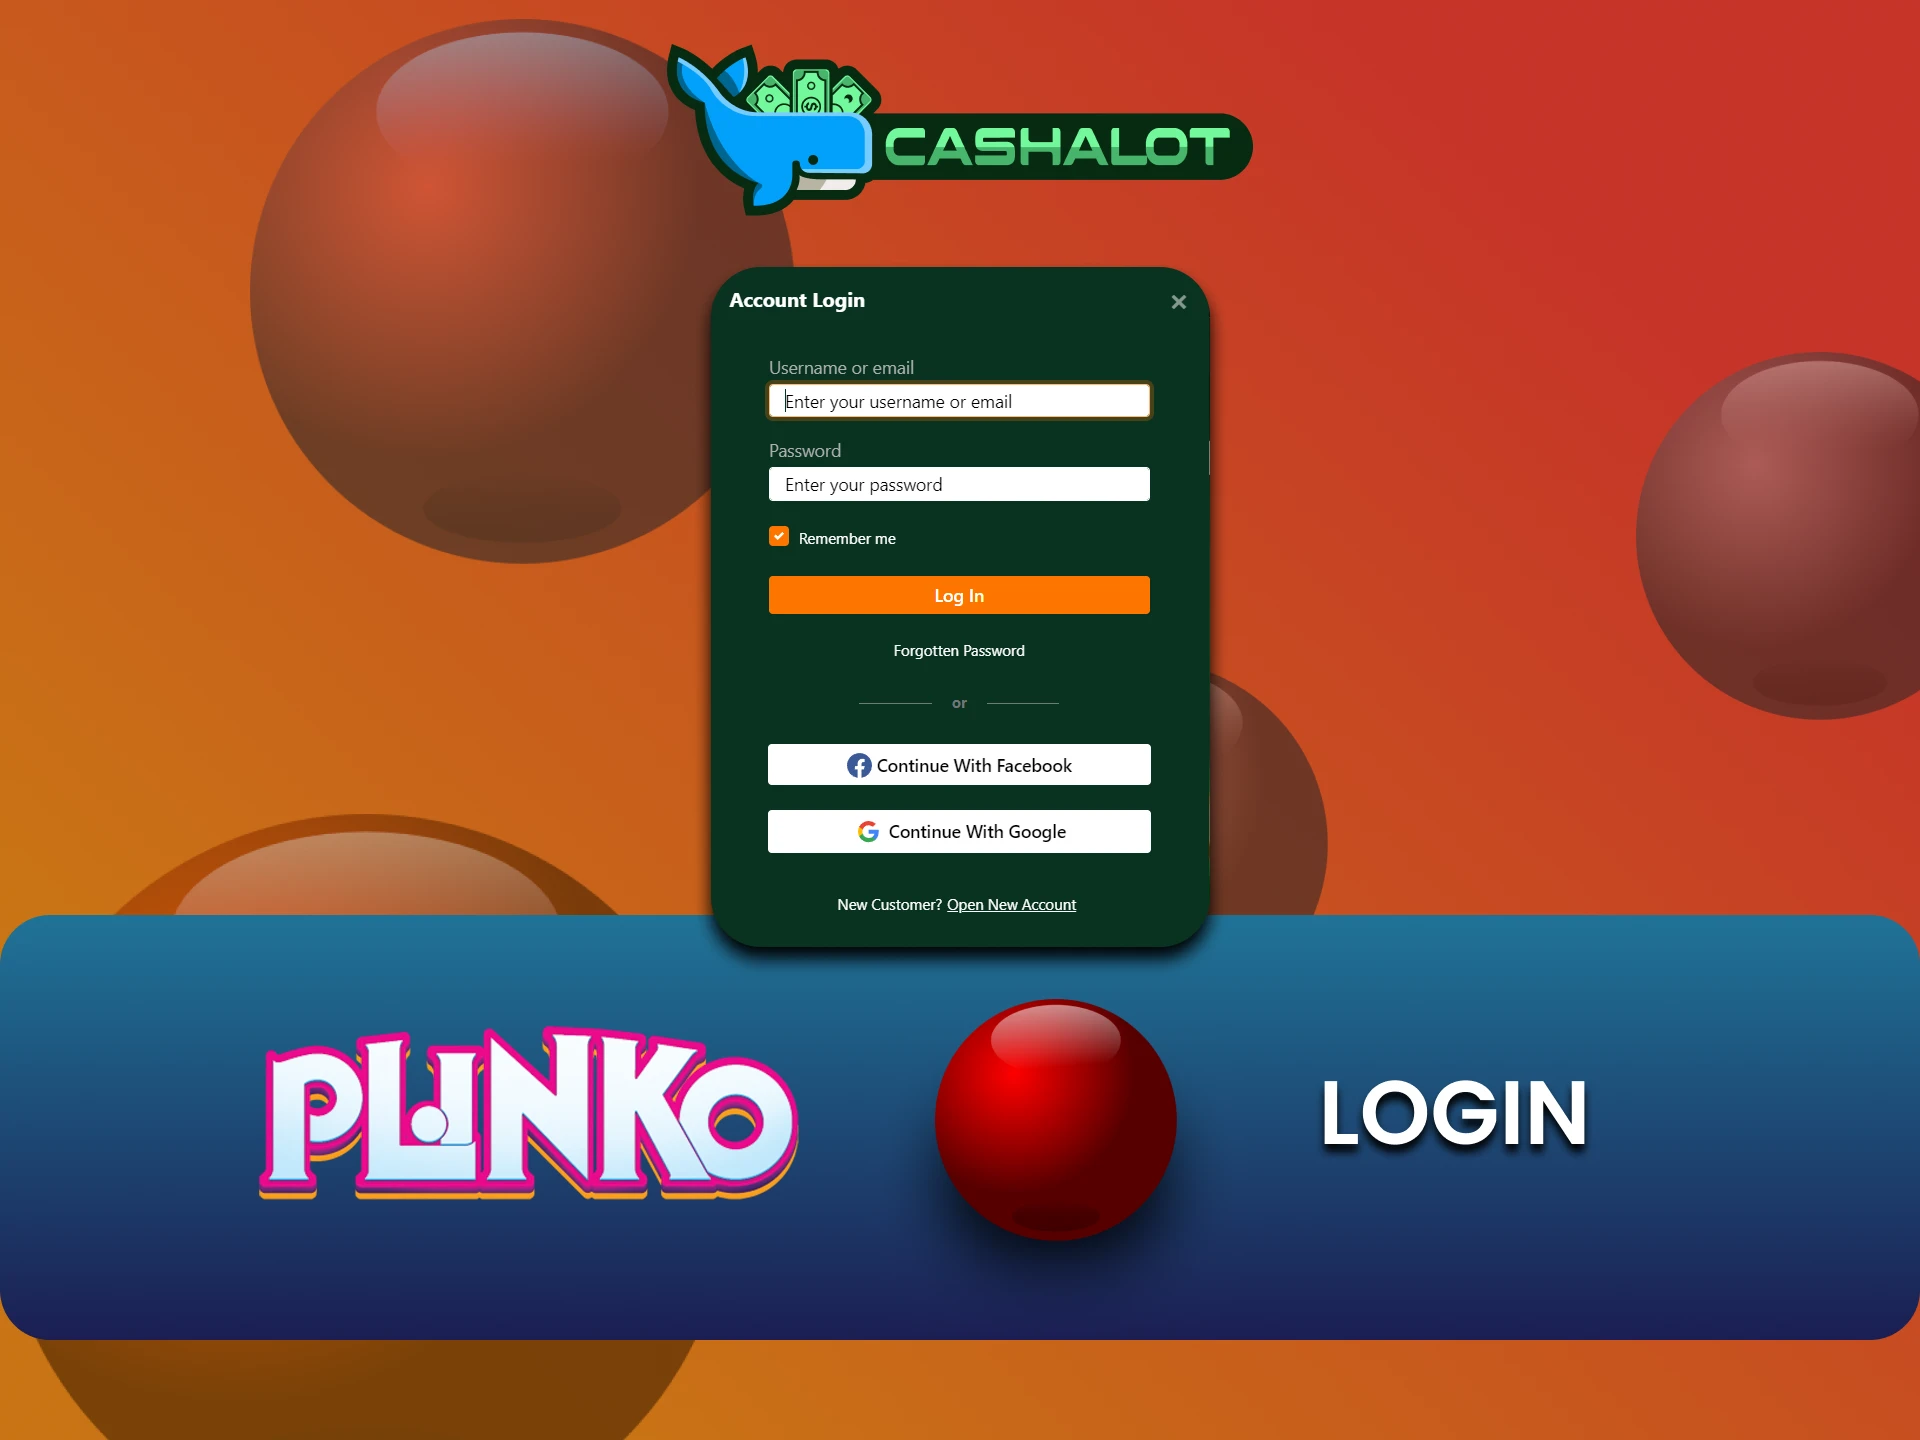 Log in to your Cashalot account and play Plinko.